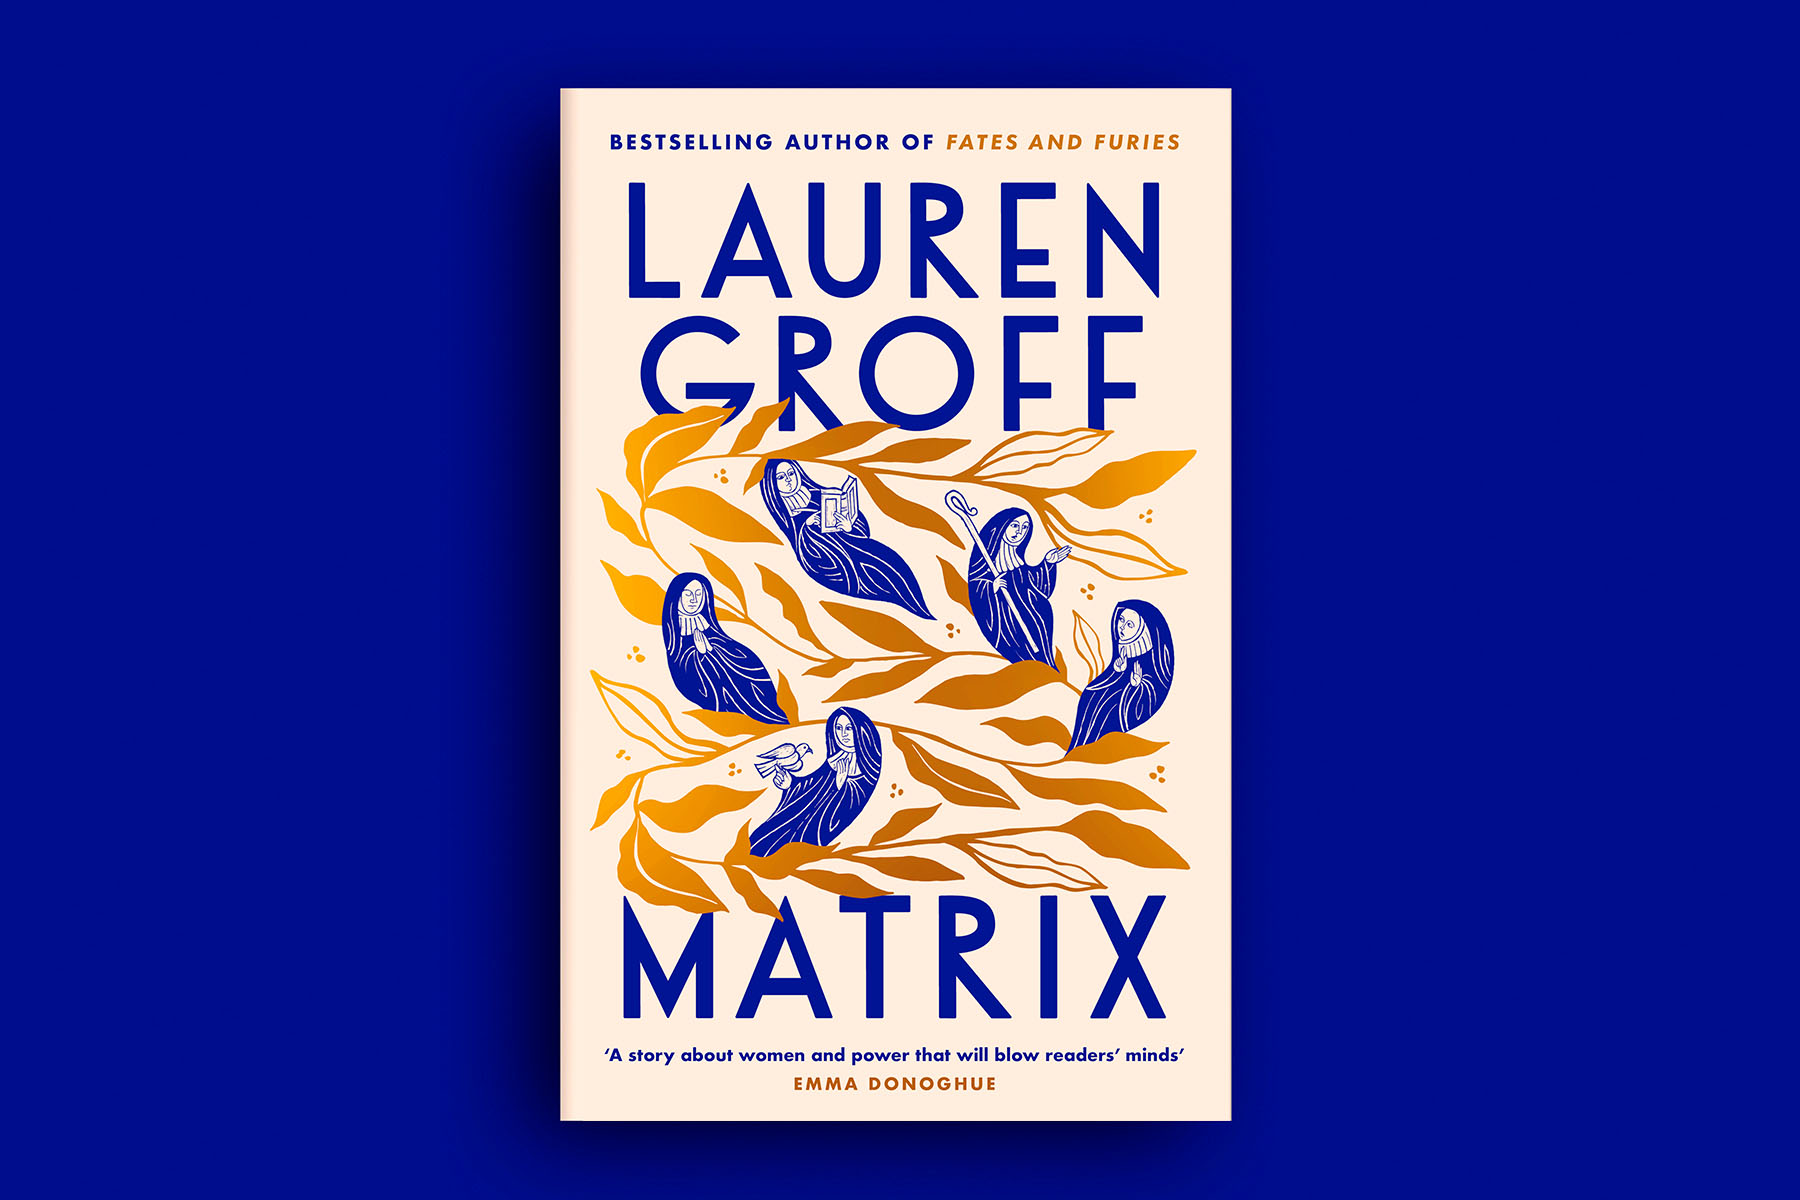 The cover of Matrix, by Lauren Groff, on a blue background. The cover is pale pink with gold leaf in the centre, and blue nuns float among the leaves.